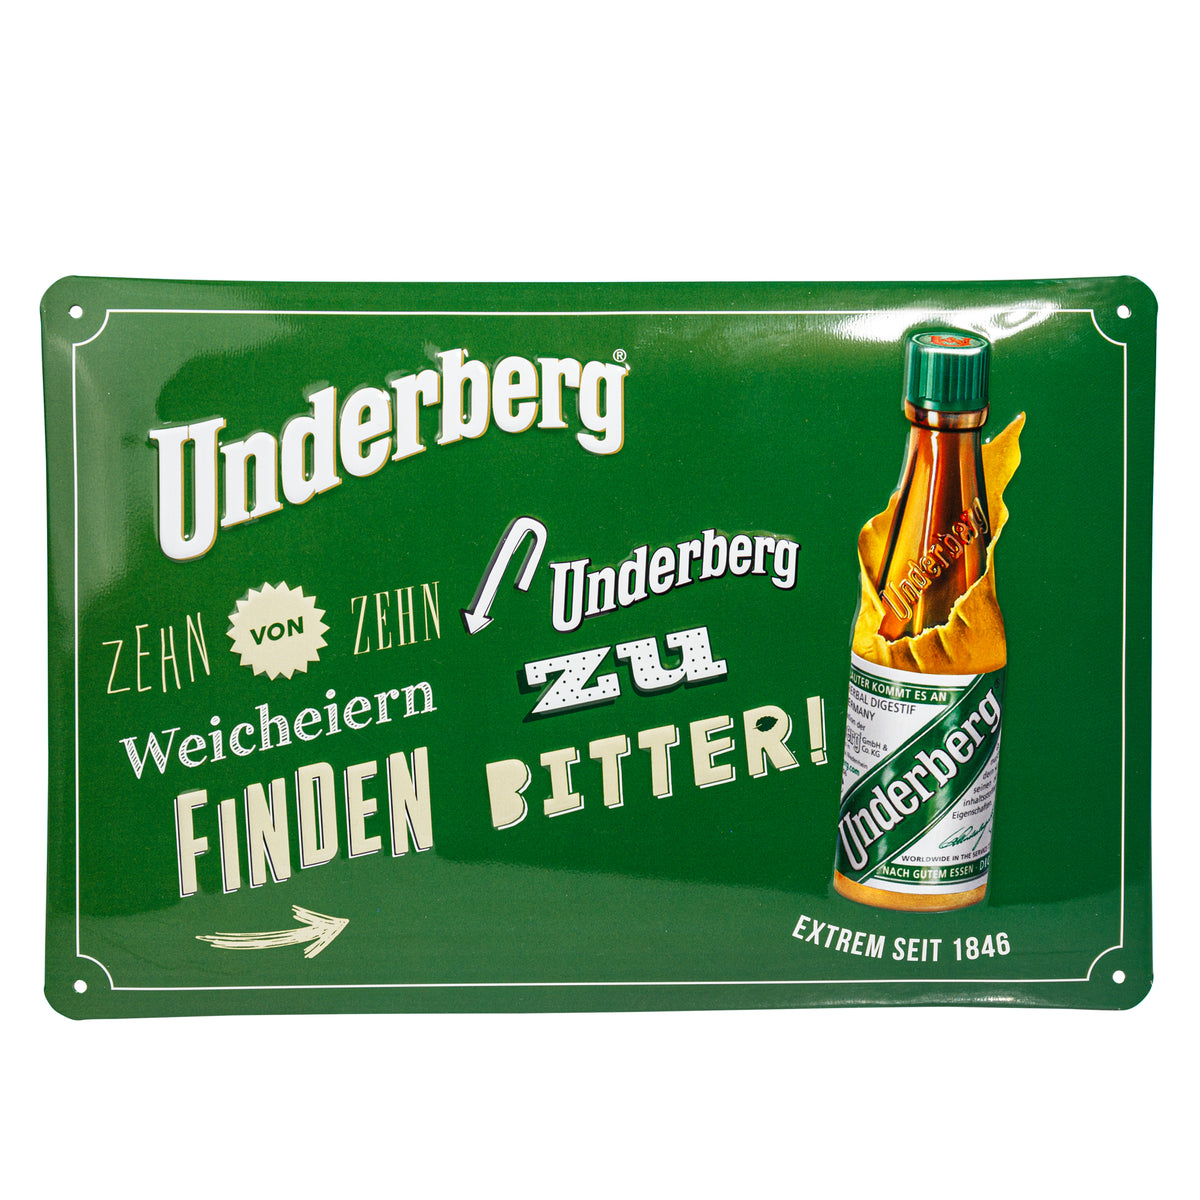 Primary Image of Underberg GWP Tin Poster